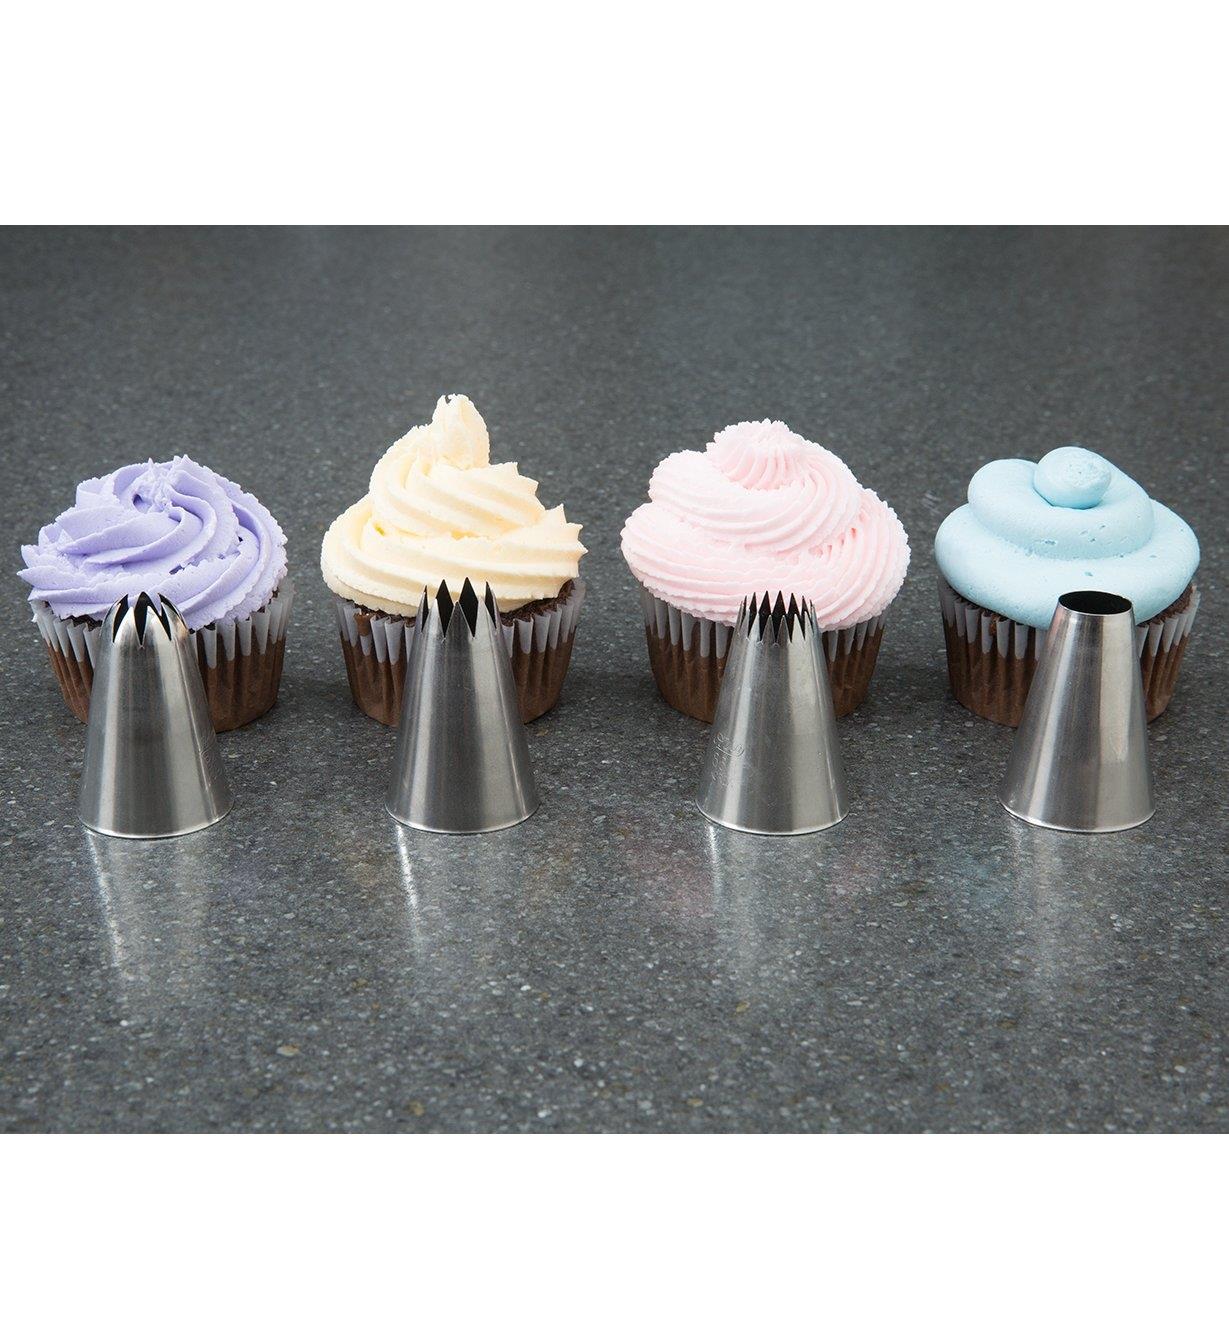 Large Icing Tips placed in front of frosted cupcakes as examples of the patterns they produce